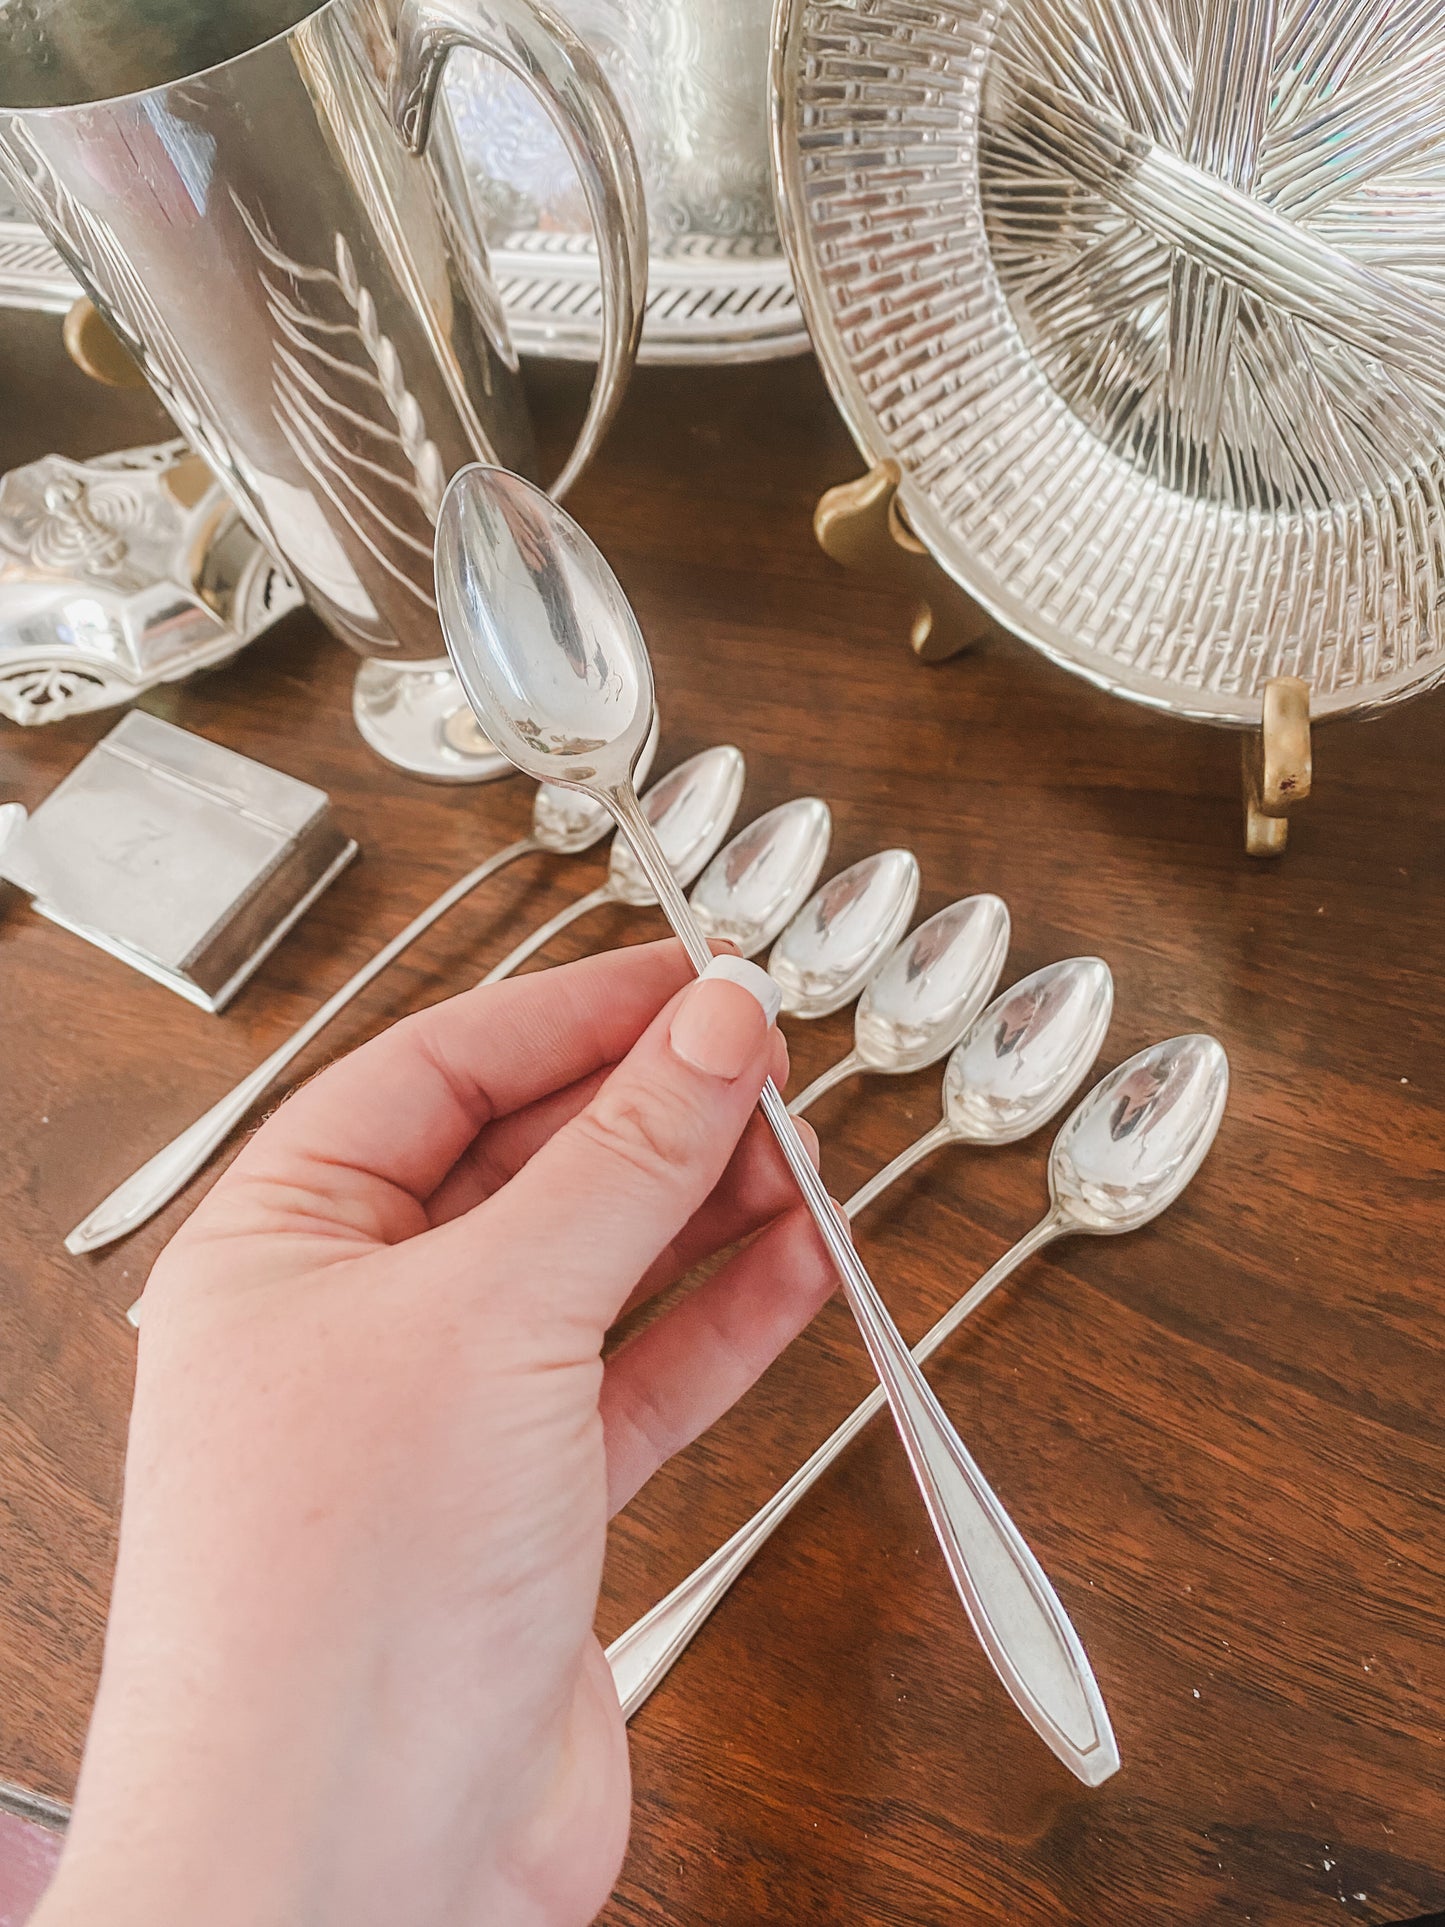 Set of 8 Antique Ice Tea Spoons from 1910